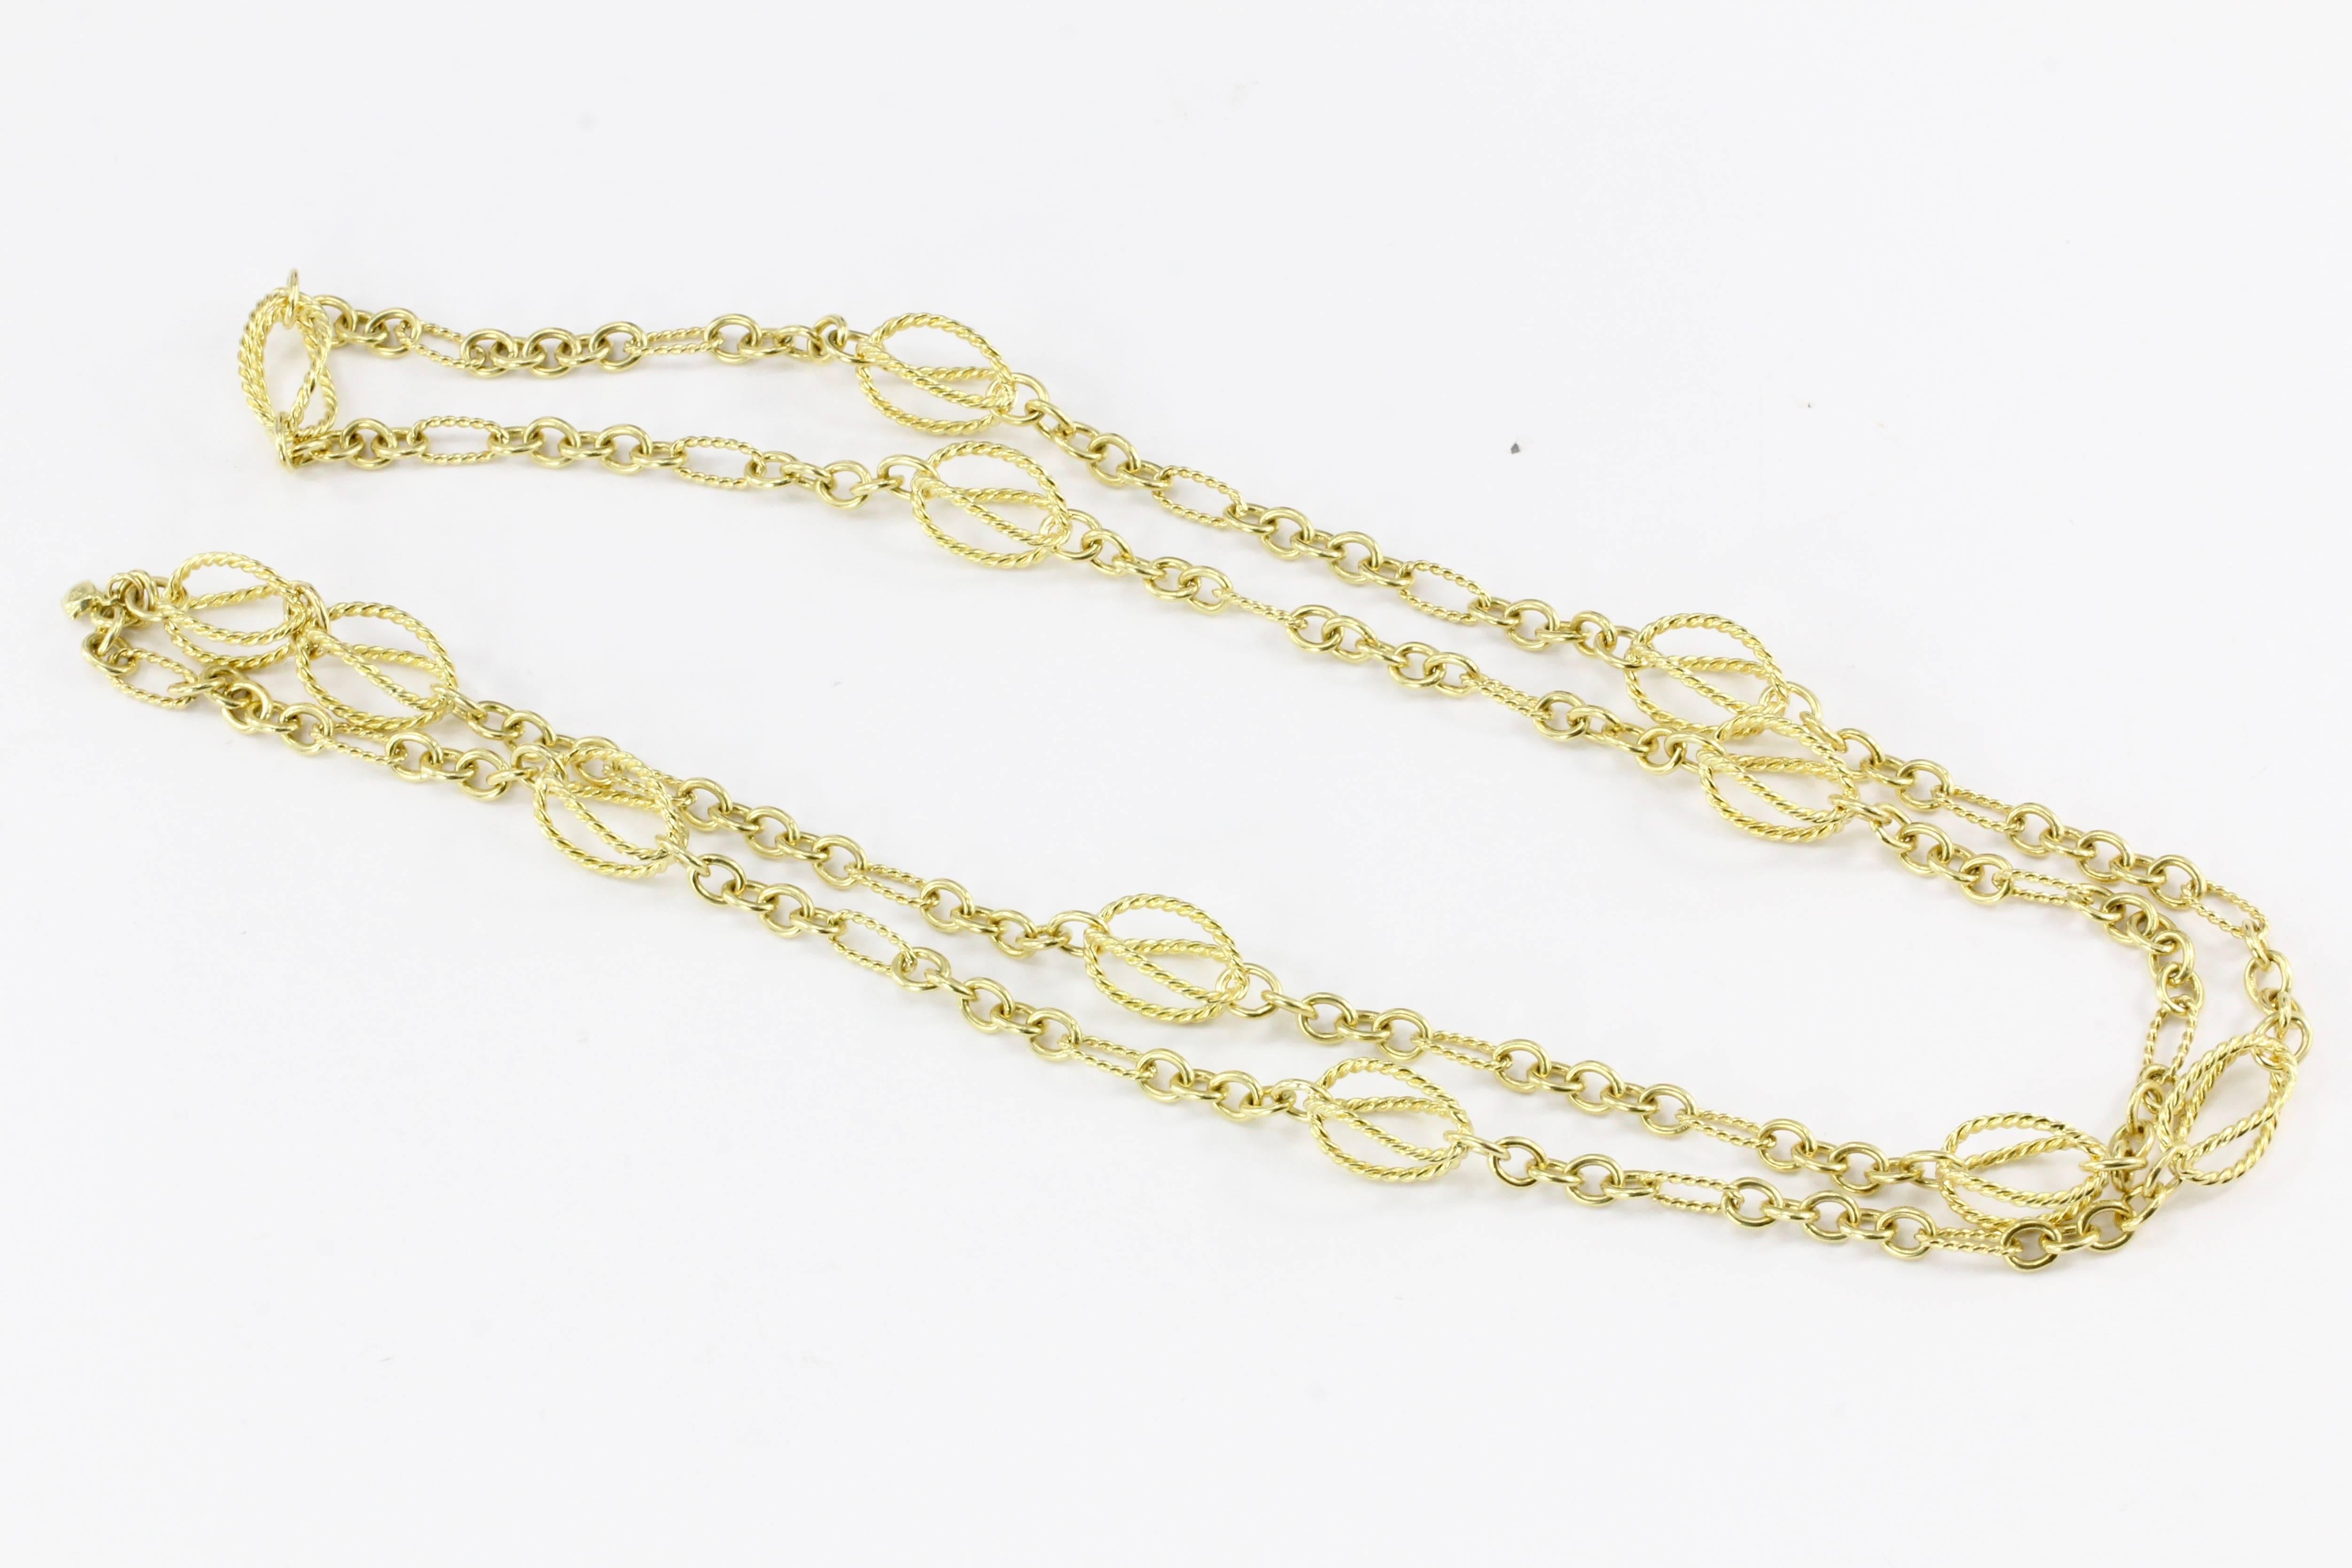 Hallmarks: D.Y 750

Composition: 18K Yellow Gold 

Total length: 42